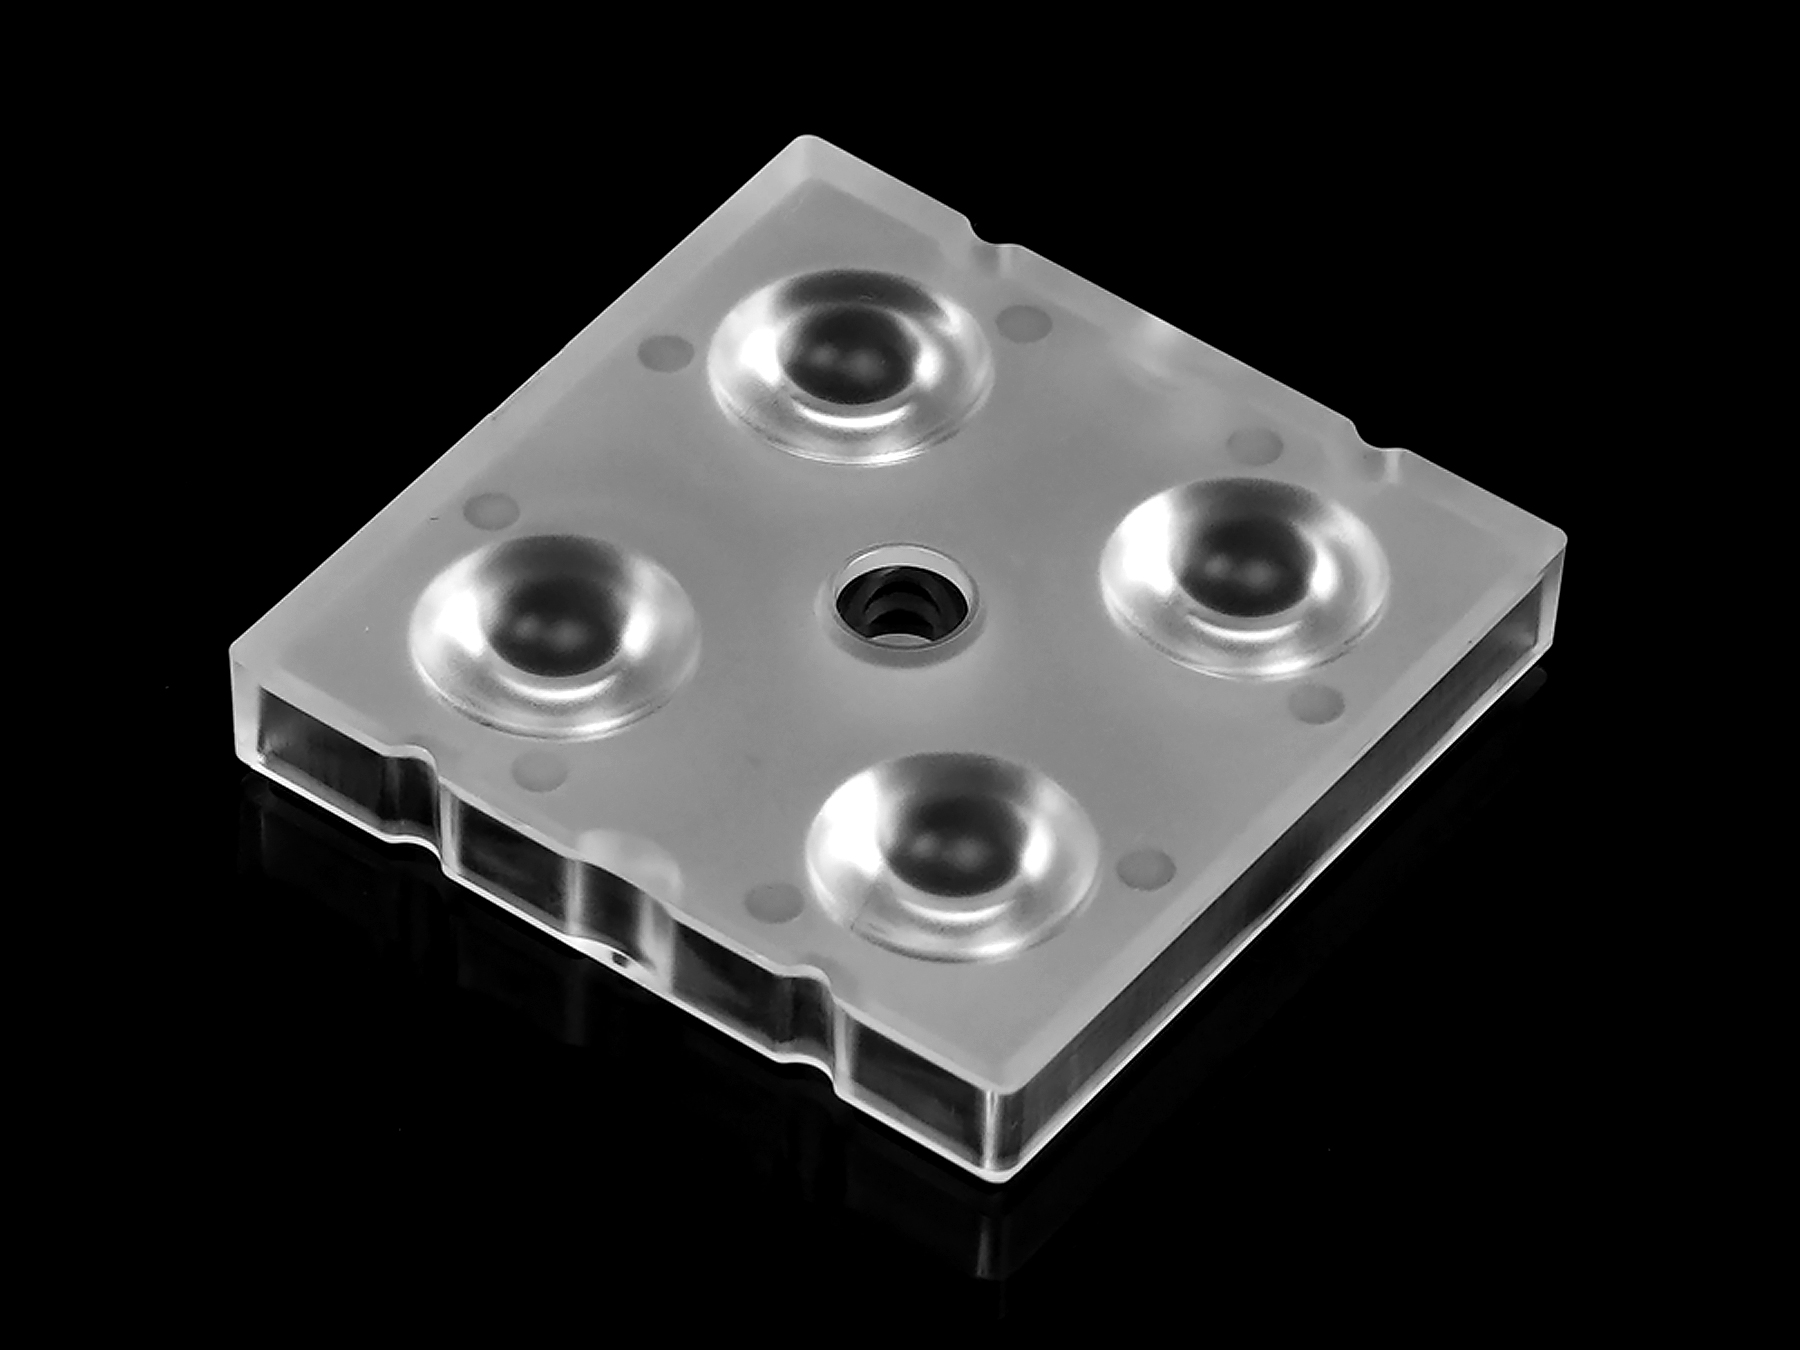 2x2 lens compatible with "3535" and "5050" LEDs 30° for High Bay lighting